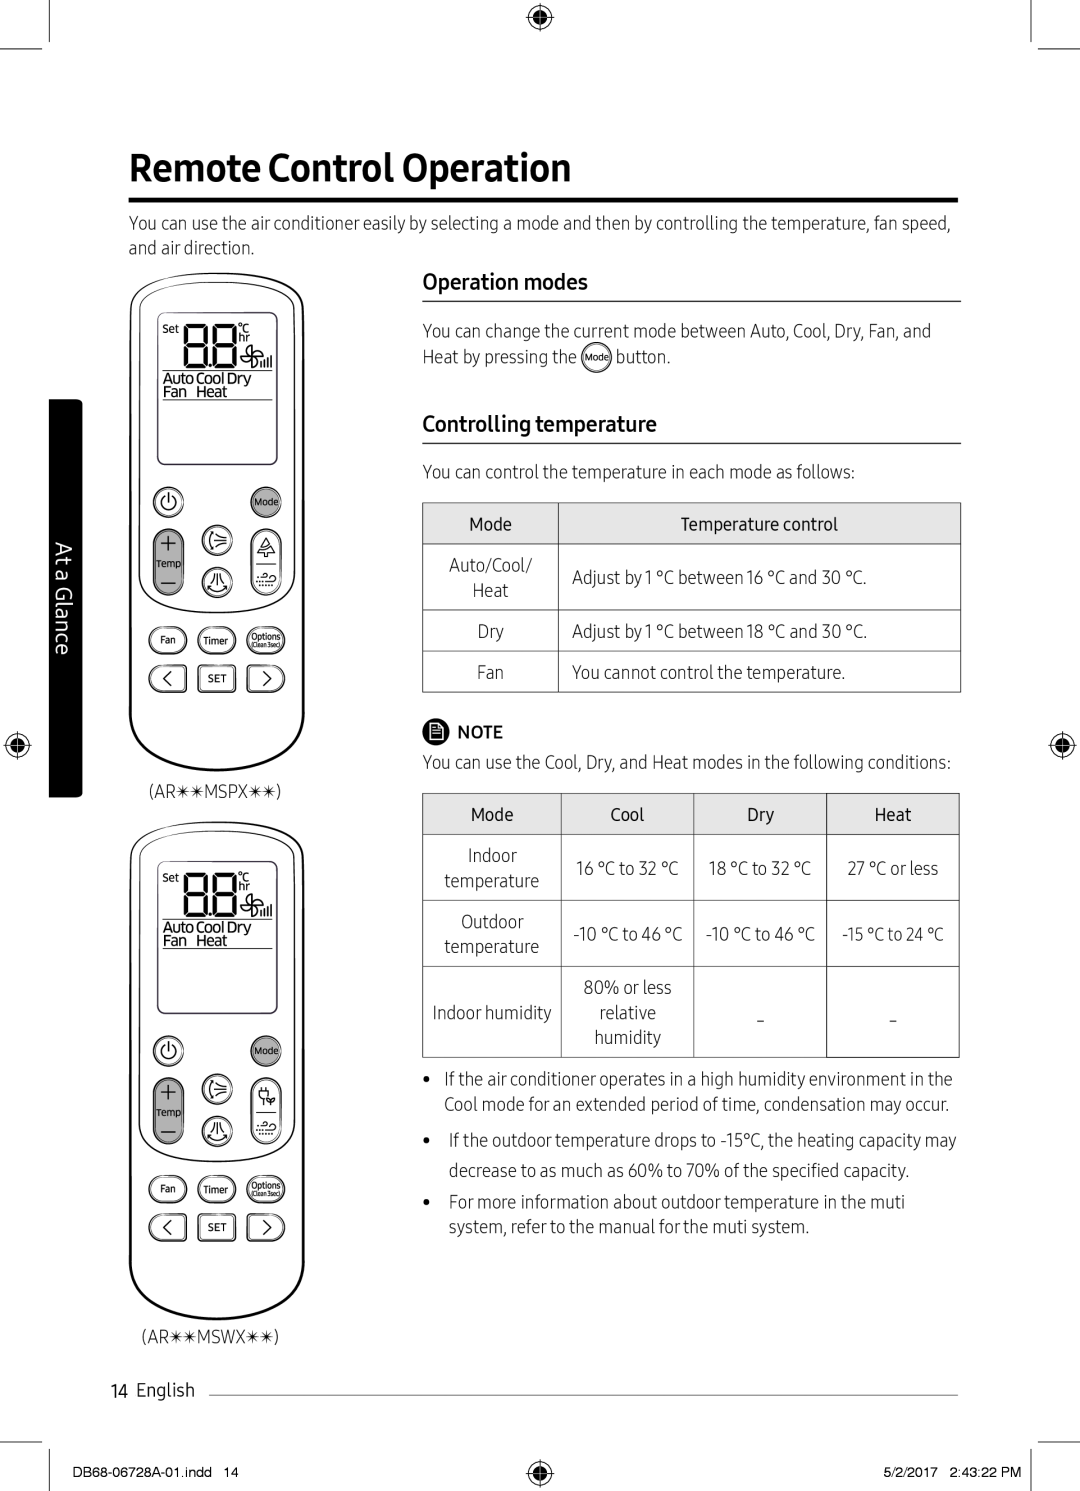 Samsung AR09MSWXBWKNEU, AR12MSPXASINEU Remote Control Operation, At a Glance, Operation modes, Controlling temperature 